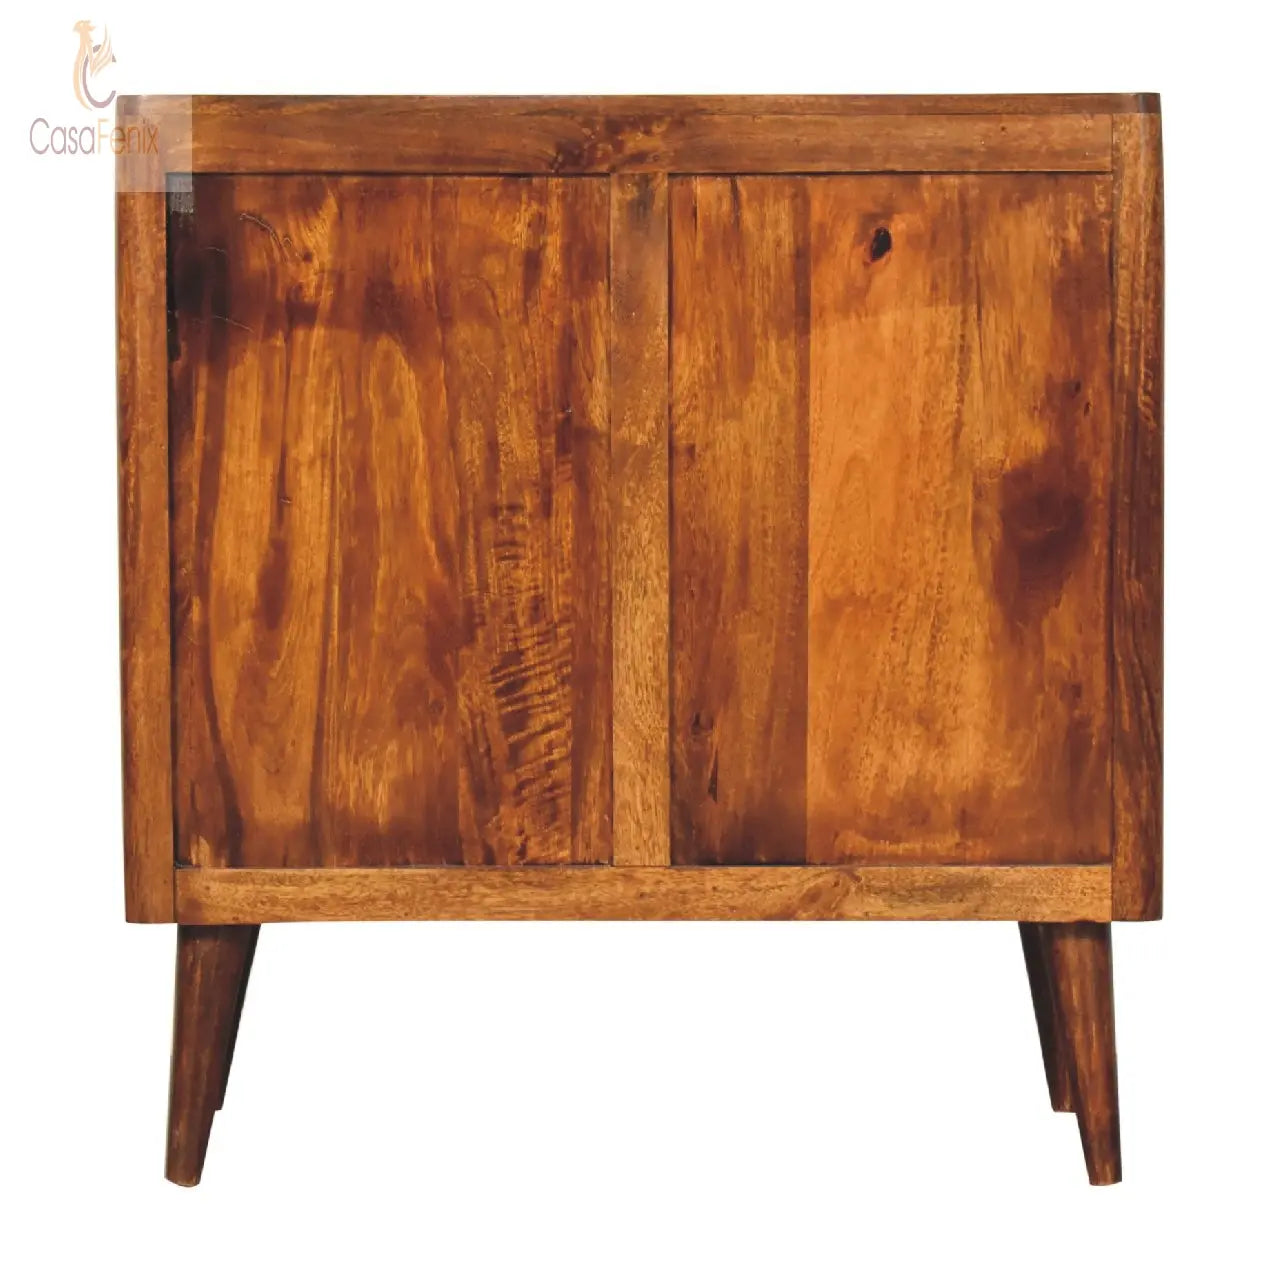 Capri Chest of 3 Drawers Nordic Design with a Chestnut Finish over Solid Mango Wood - CasaFenix